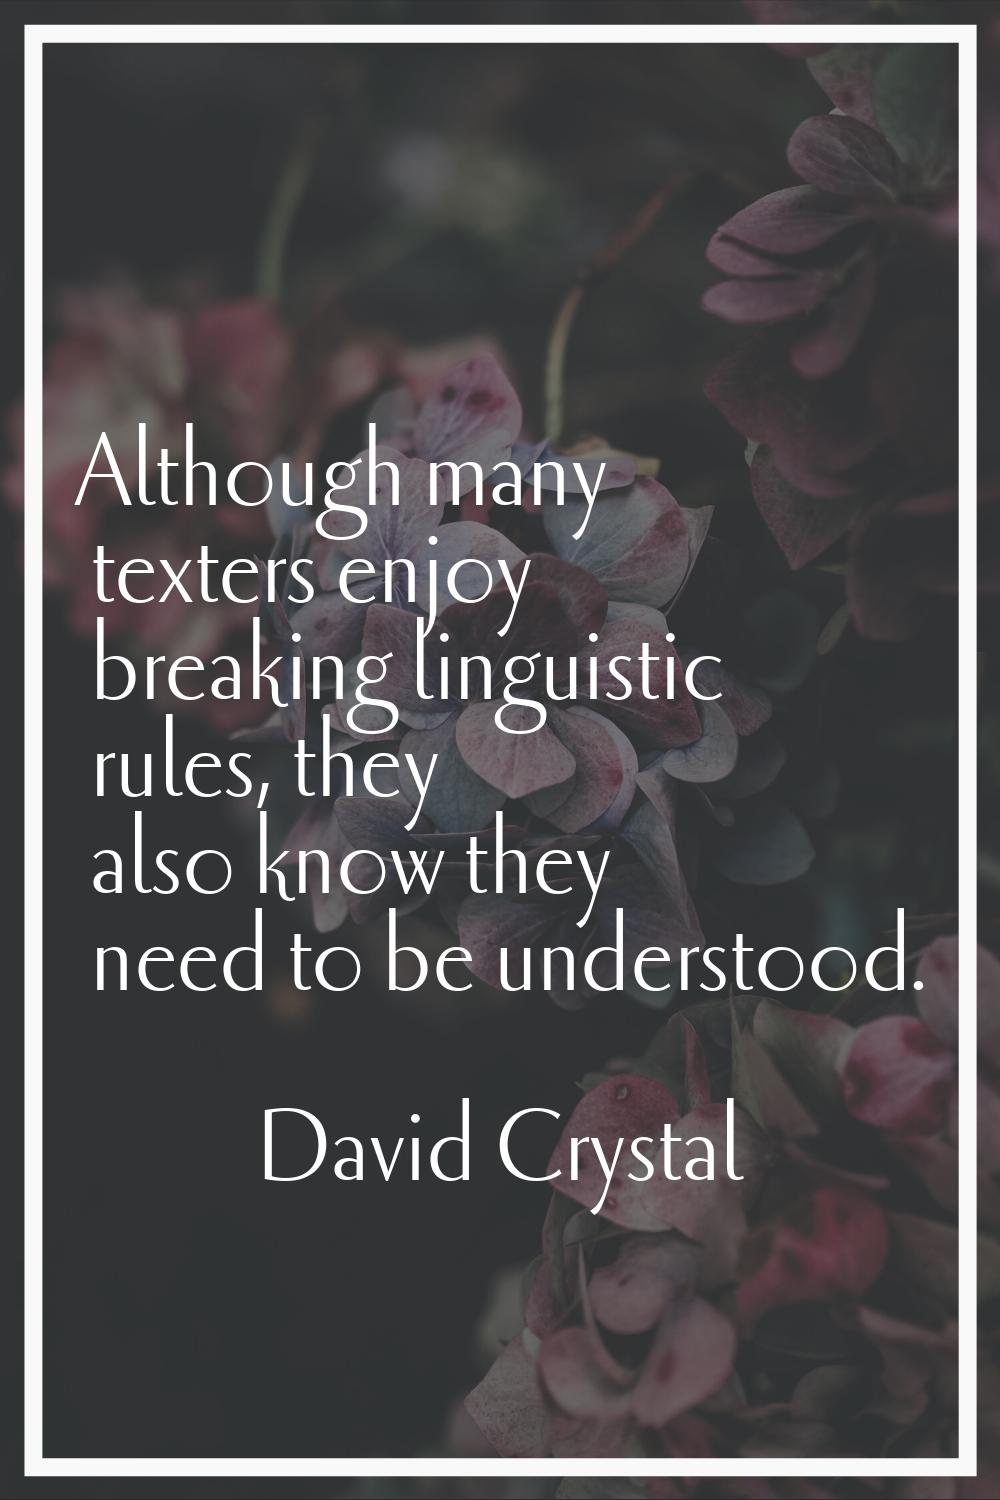 Although many texters enjoy breaking linguistic rules, they also know they need to be understood.